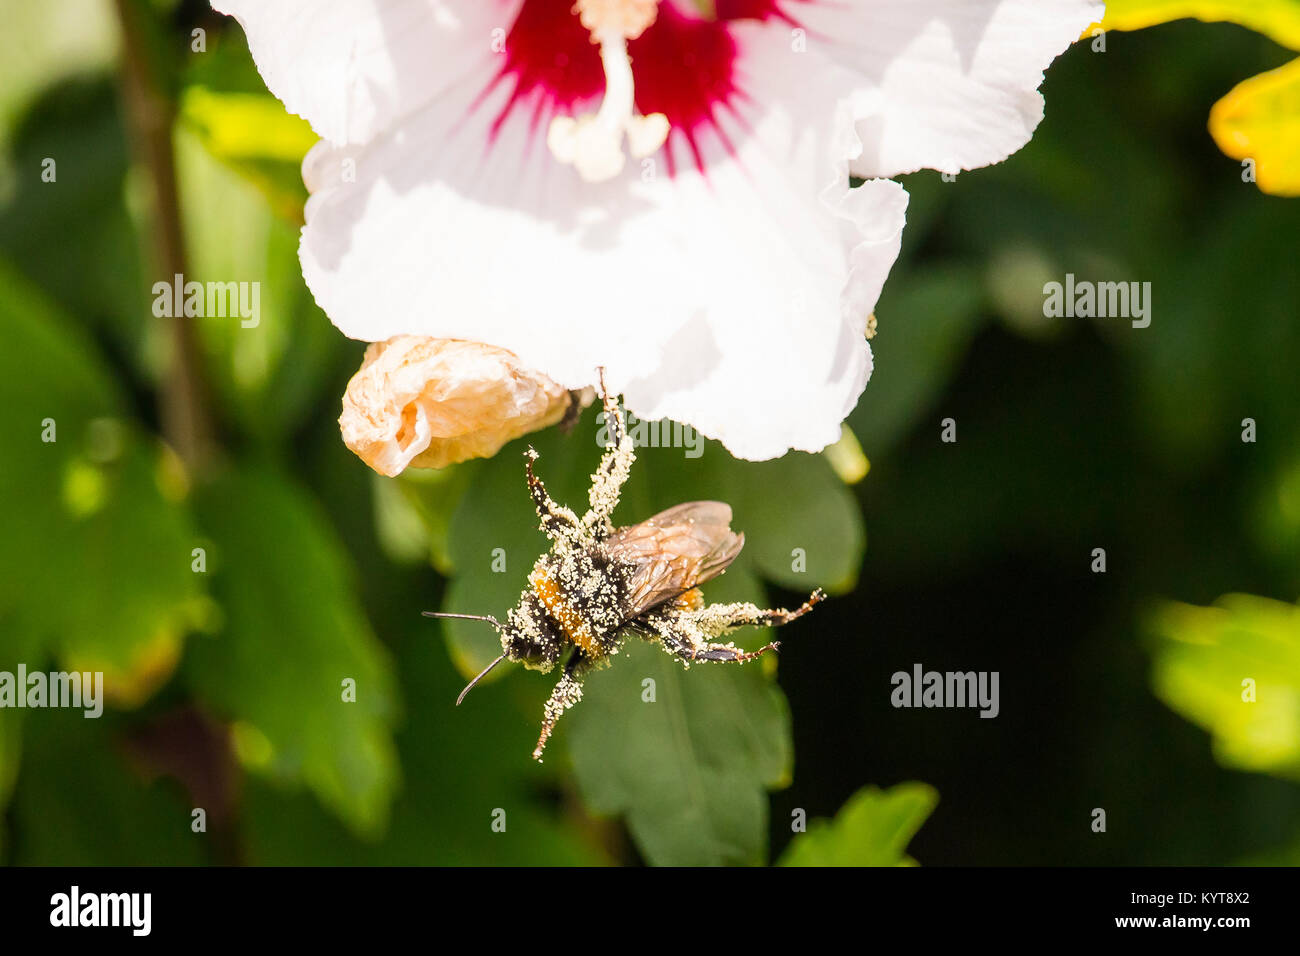 Flying bumblebee covered with pollen Stock Photo